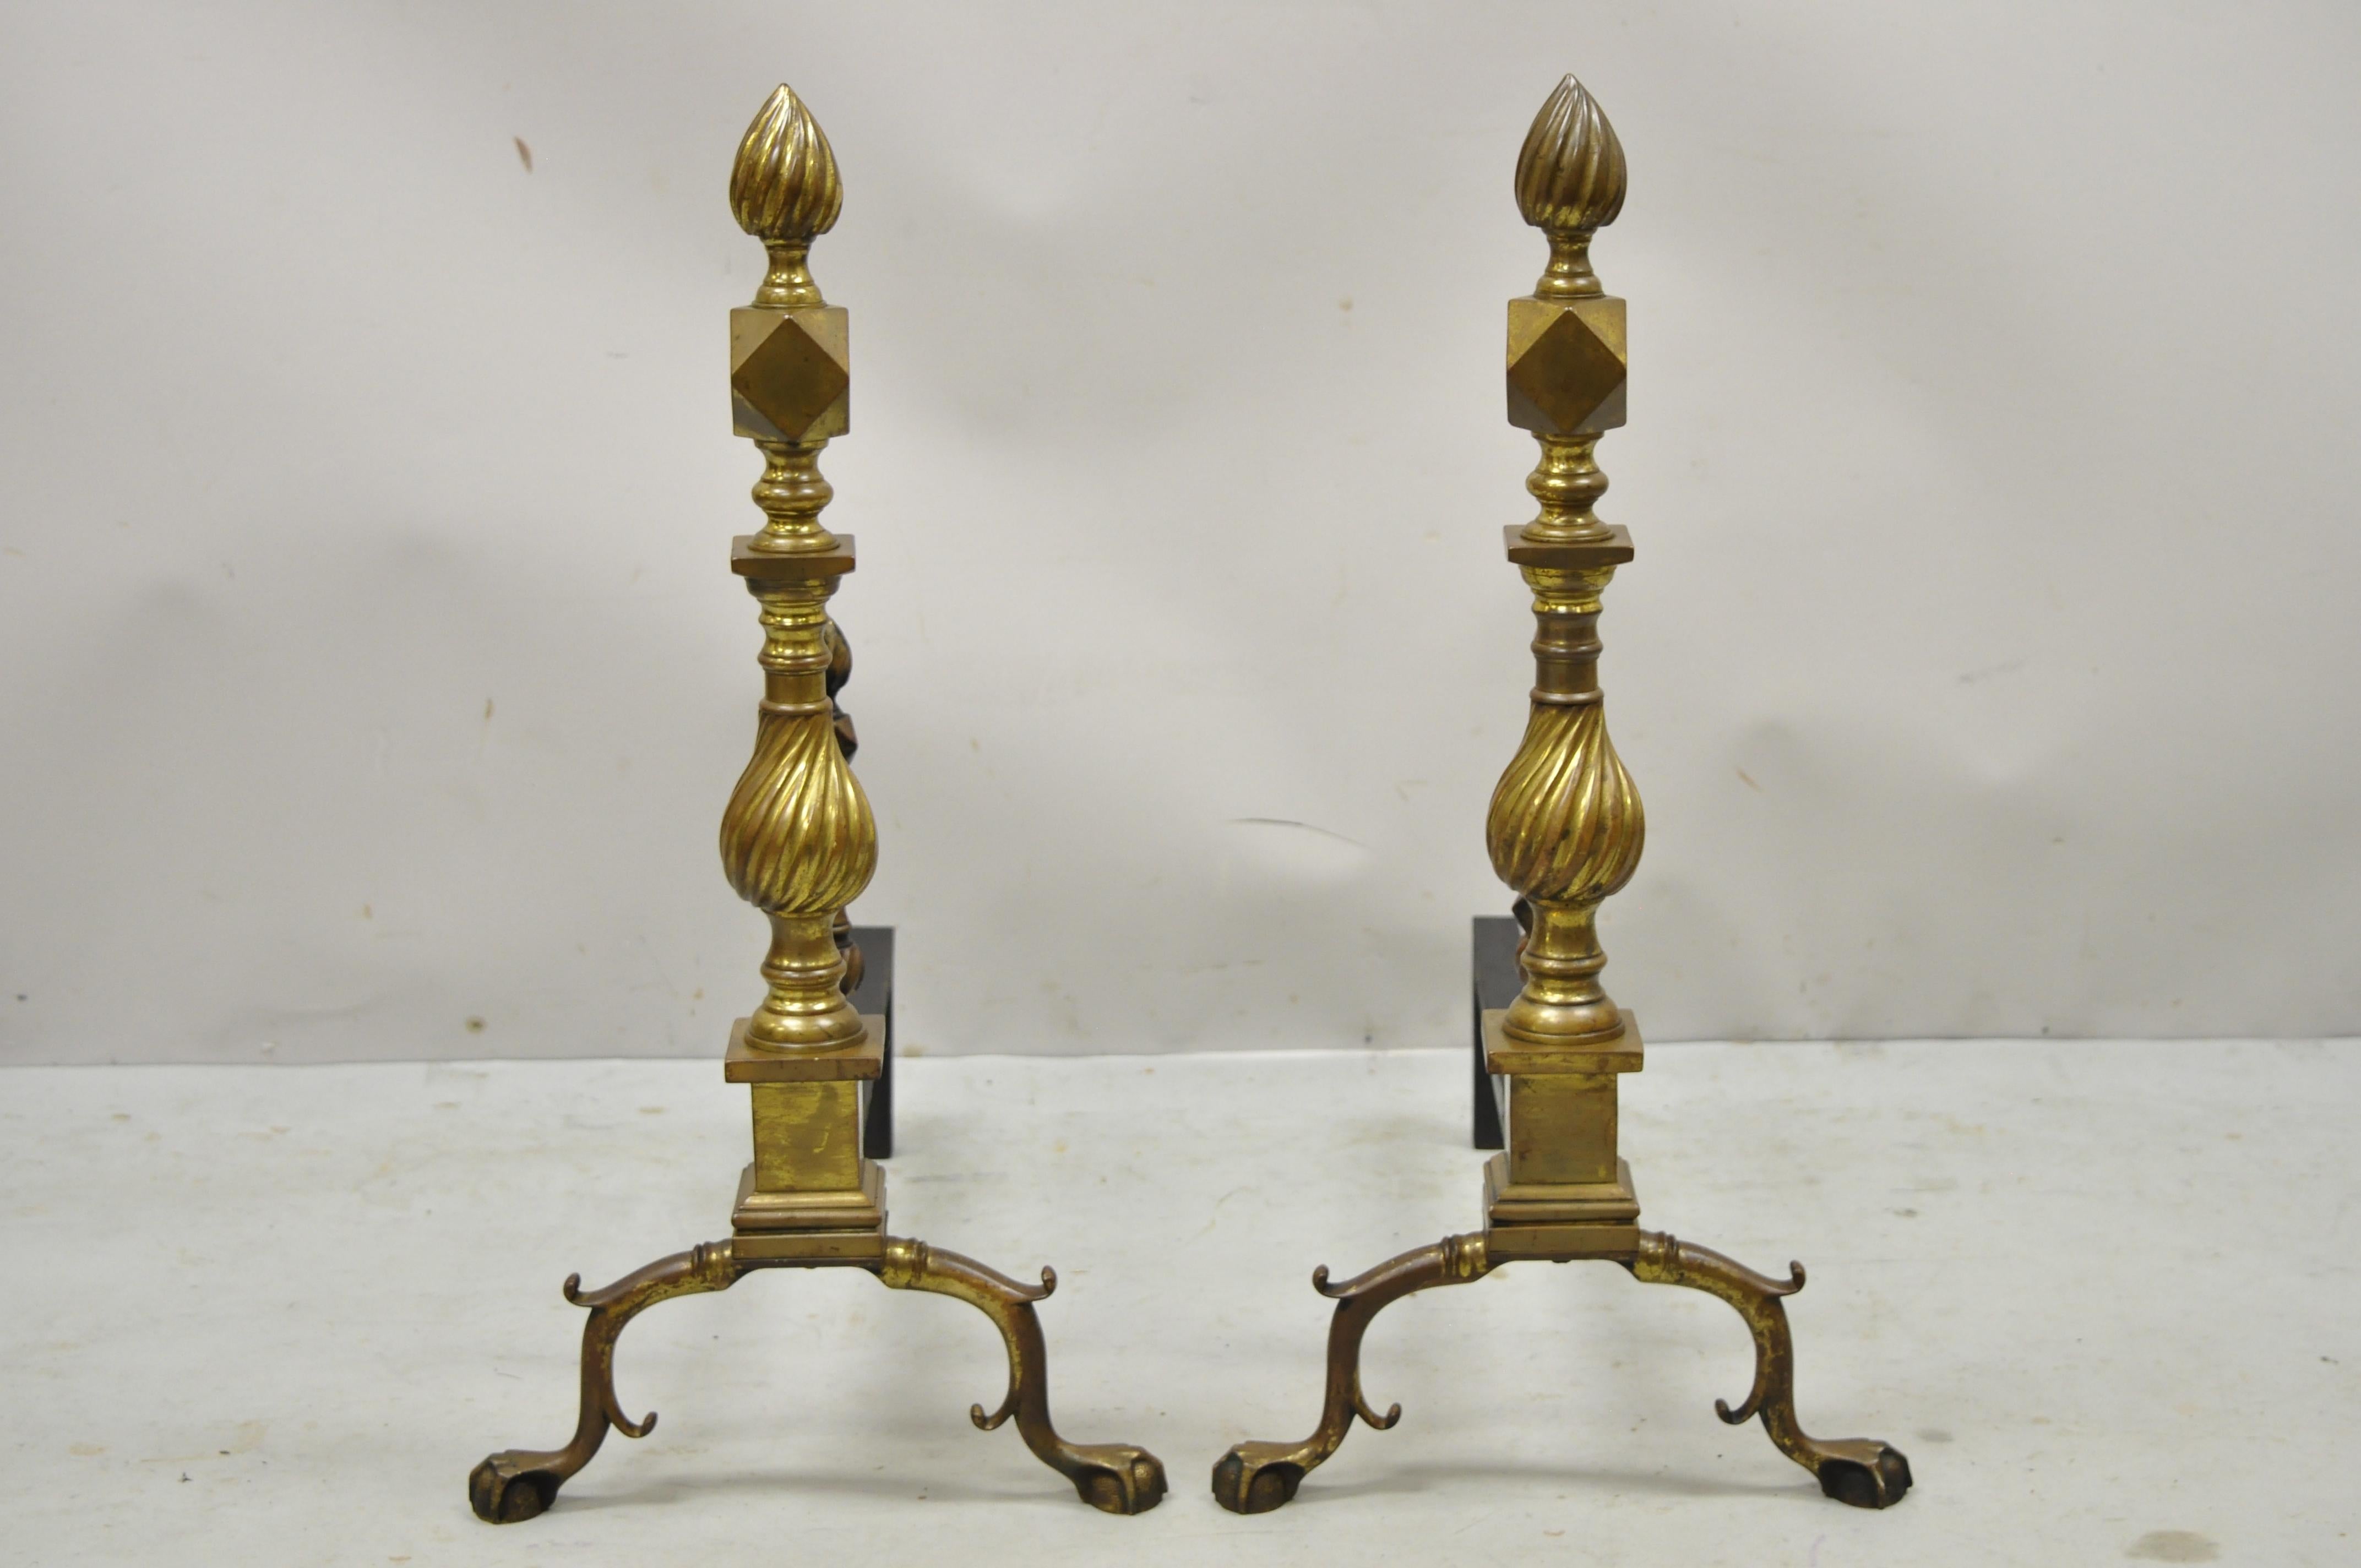 Antique English Federal brass and cast iron spiral twist finial branch legs ball & claw andirons. Item features remarkable authentic patina, spiral twist finial and column, branch legs, ball and claw feet, geometric form to column. Circa early